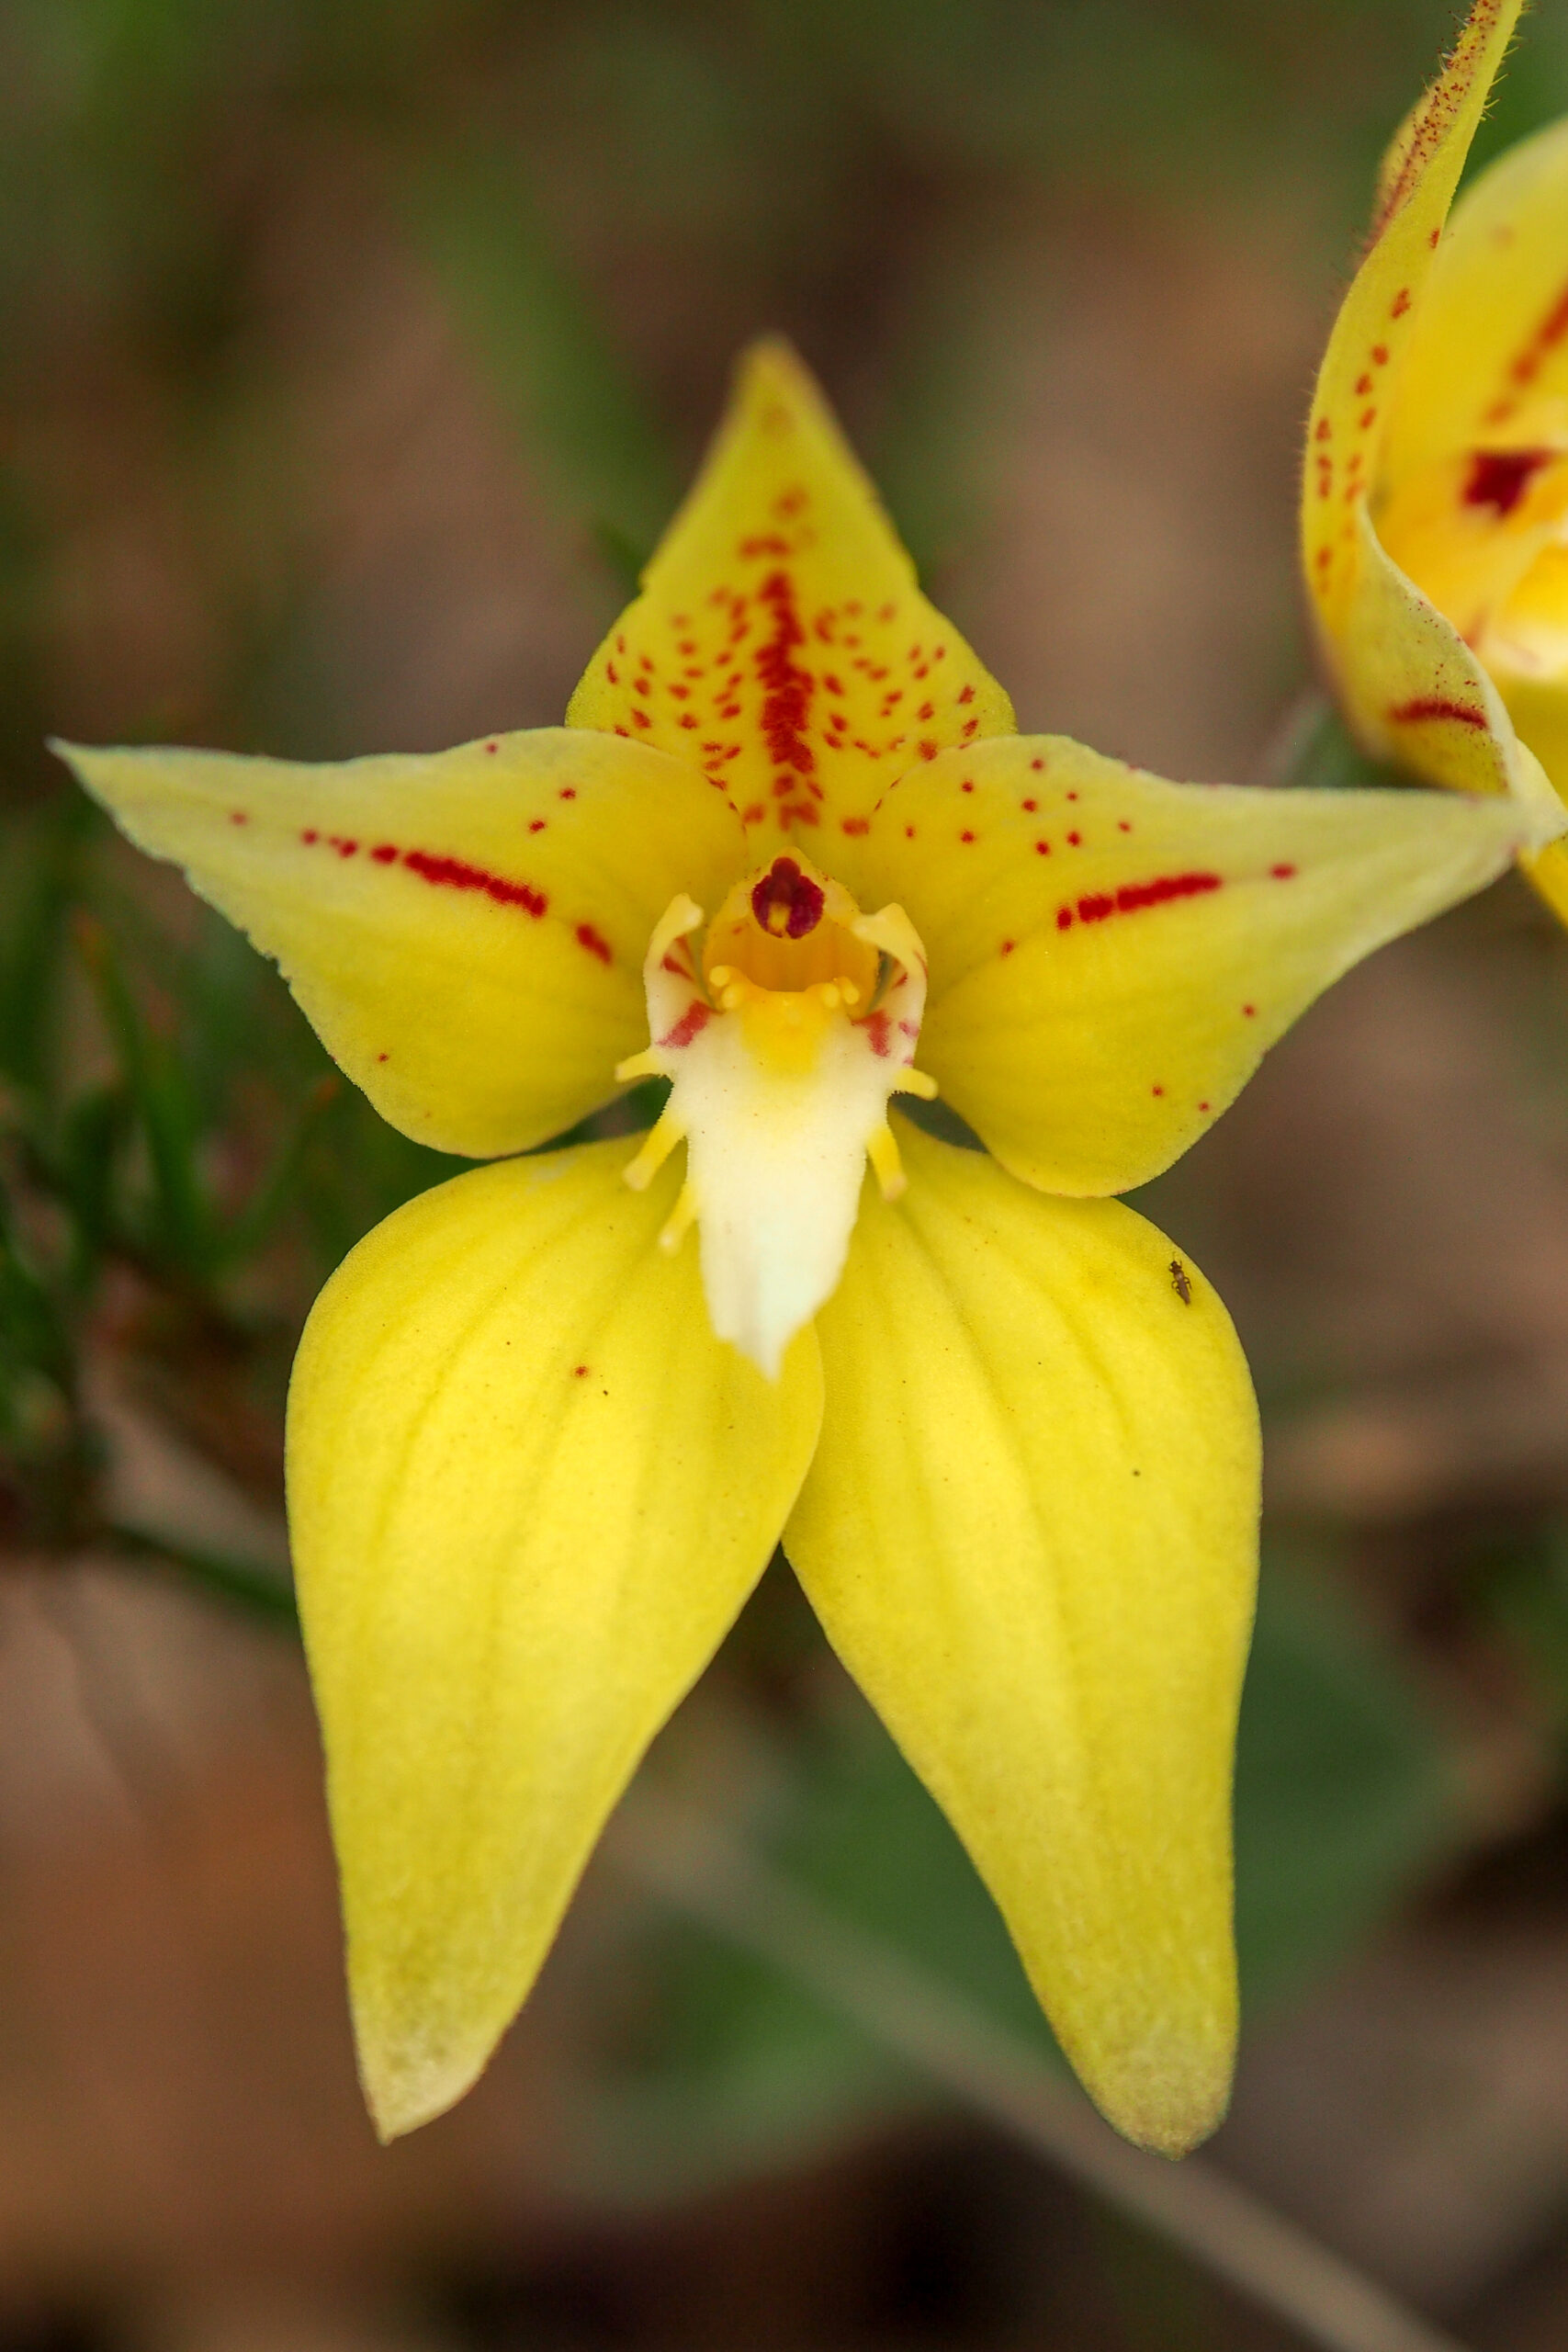 Wild Flowers and Orchids of Western Australia Photographic Day Tour